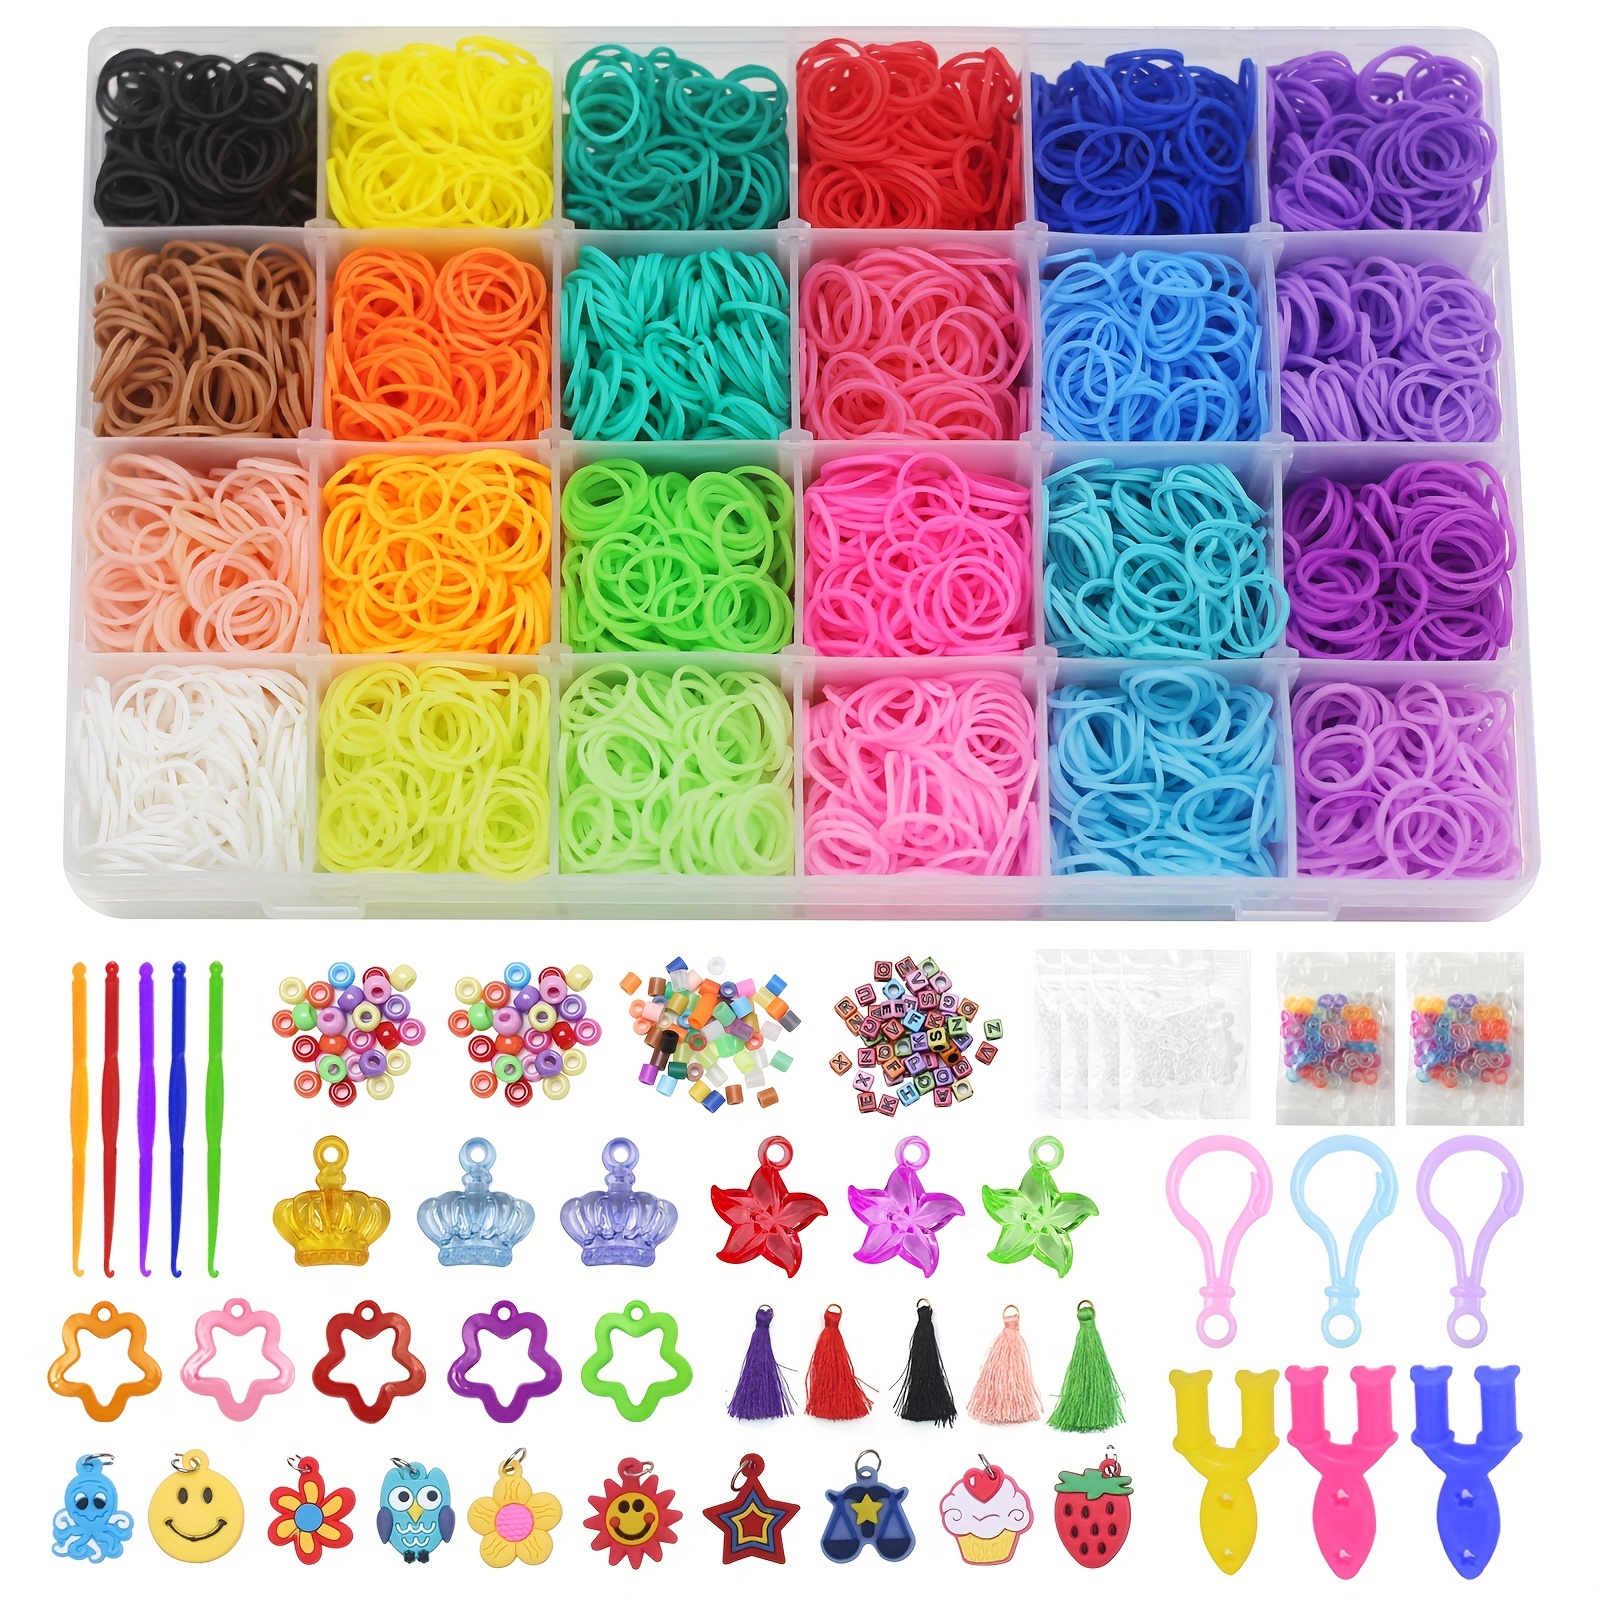 Rainbow Loom Rubber Band Bracelet Kit, Ages 8 and Older